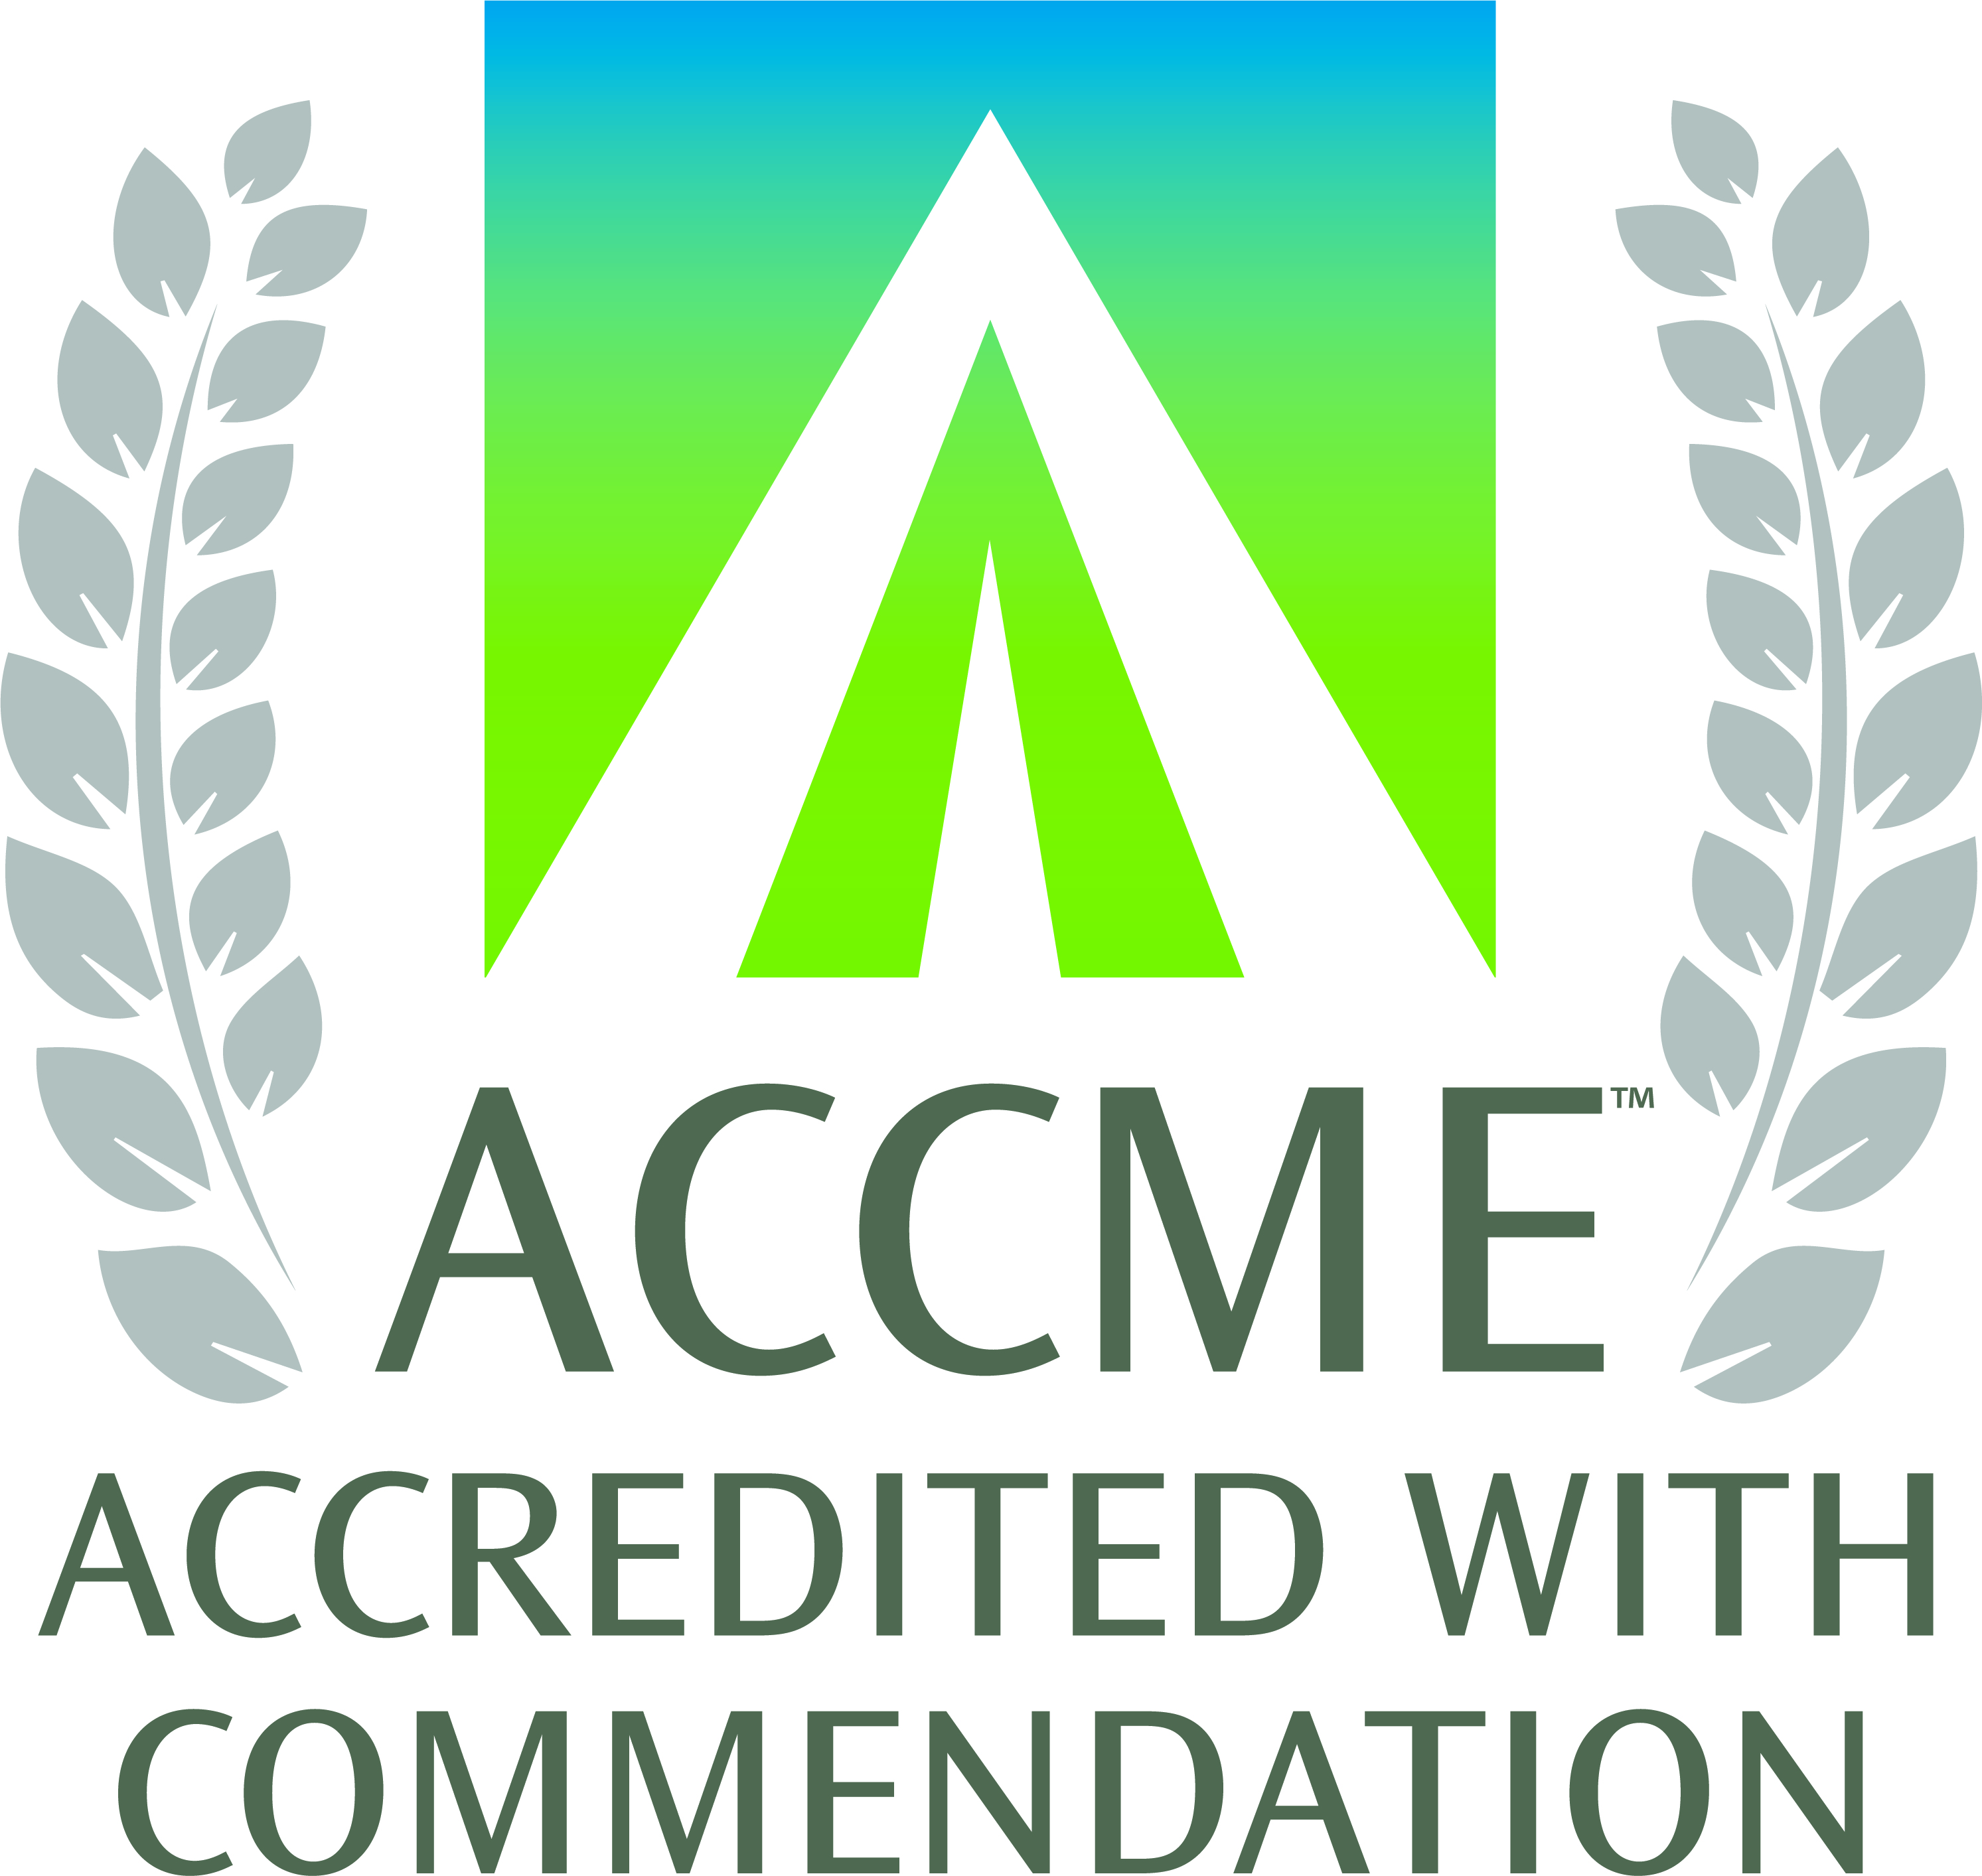  ACCME accredited